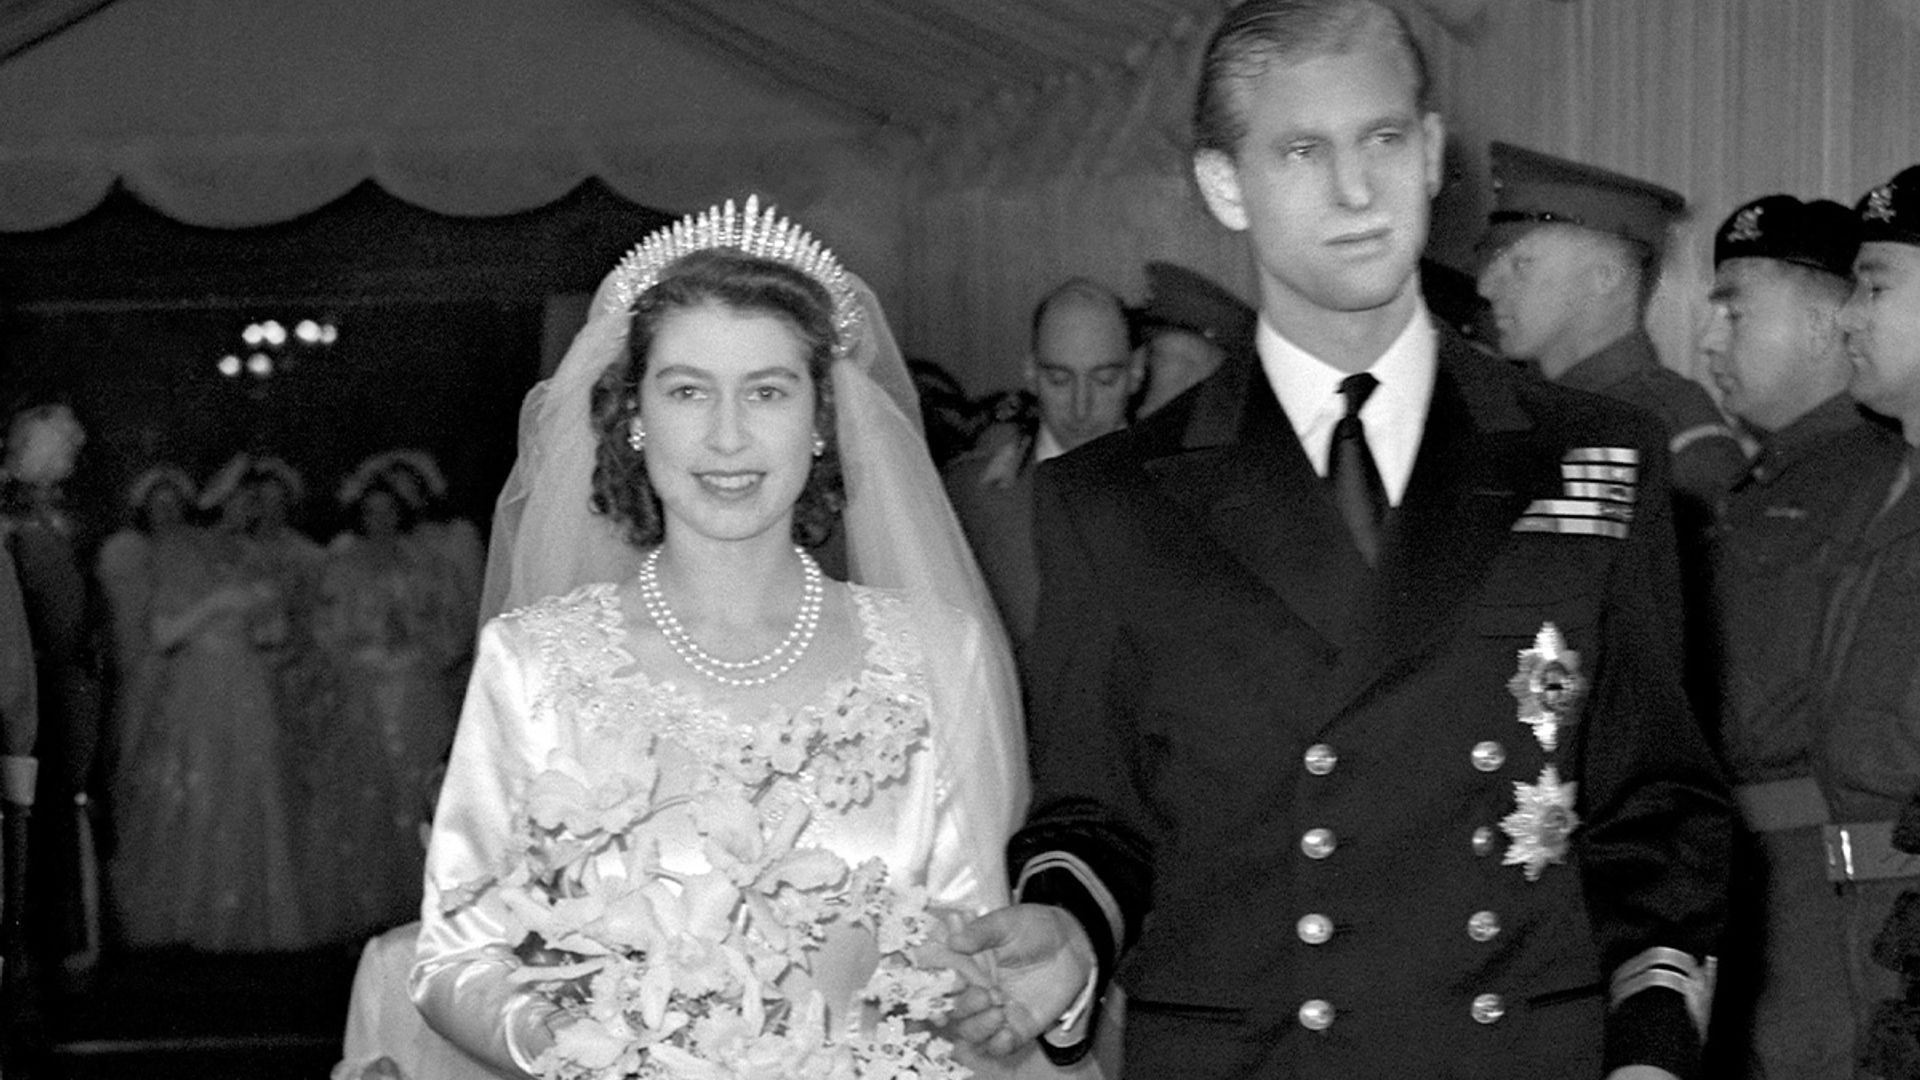 The Queen's resurfaced wedding video with Prince Philip will make you emotional